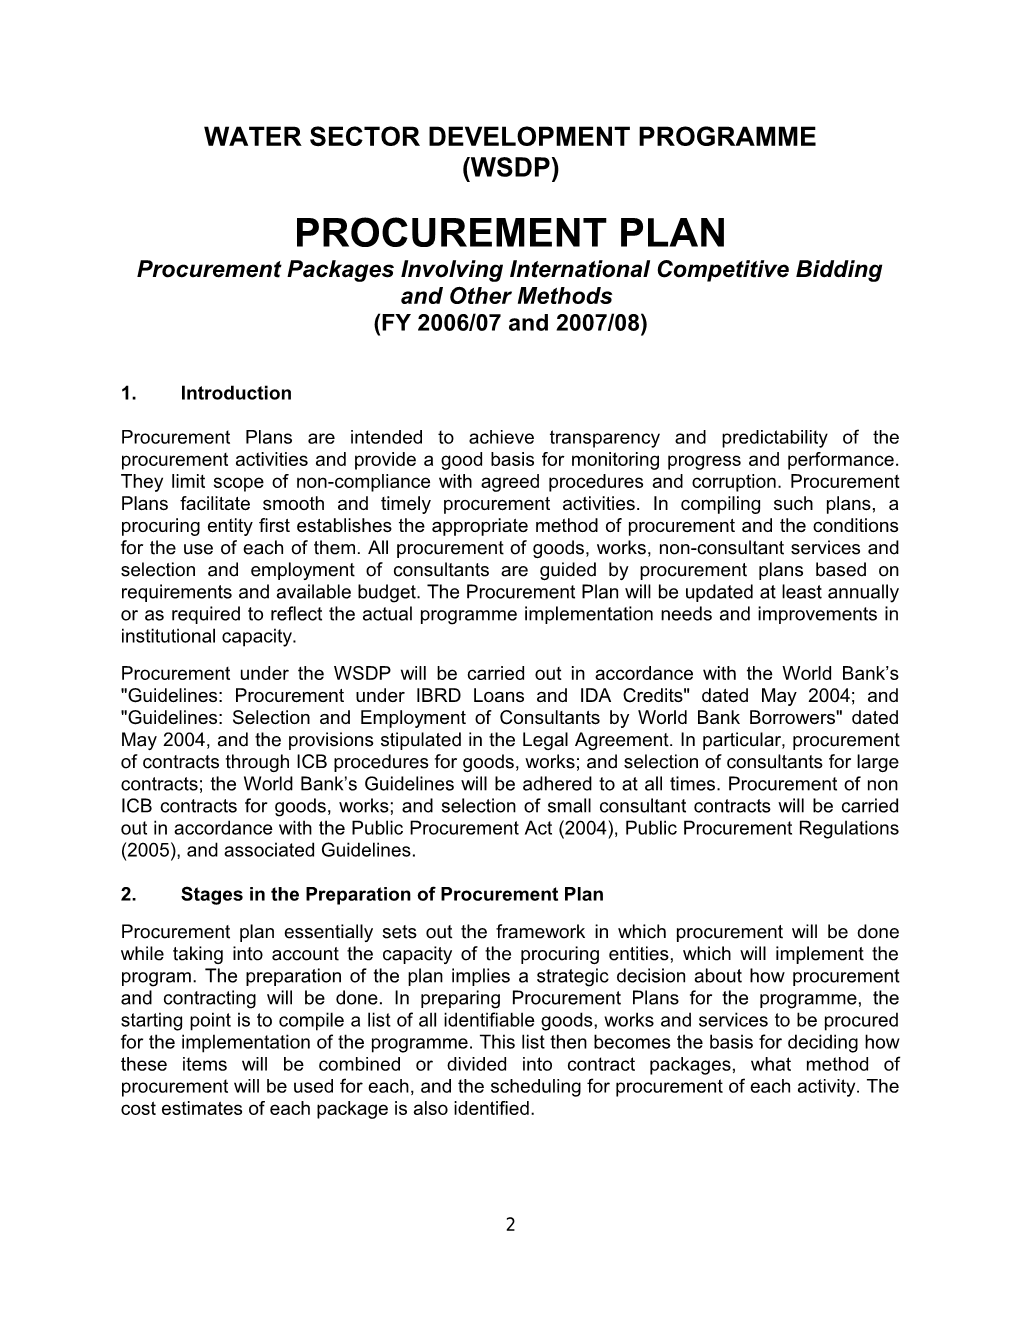 Details of the Procurement Plan Involving ICB & Other Methods(First 1.5 Years)